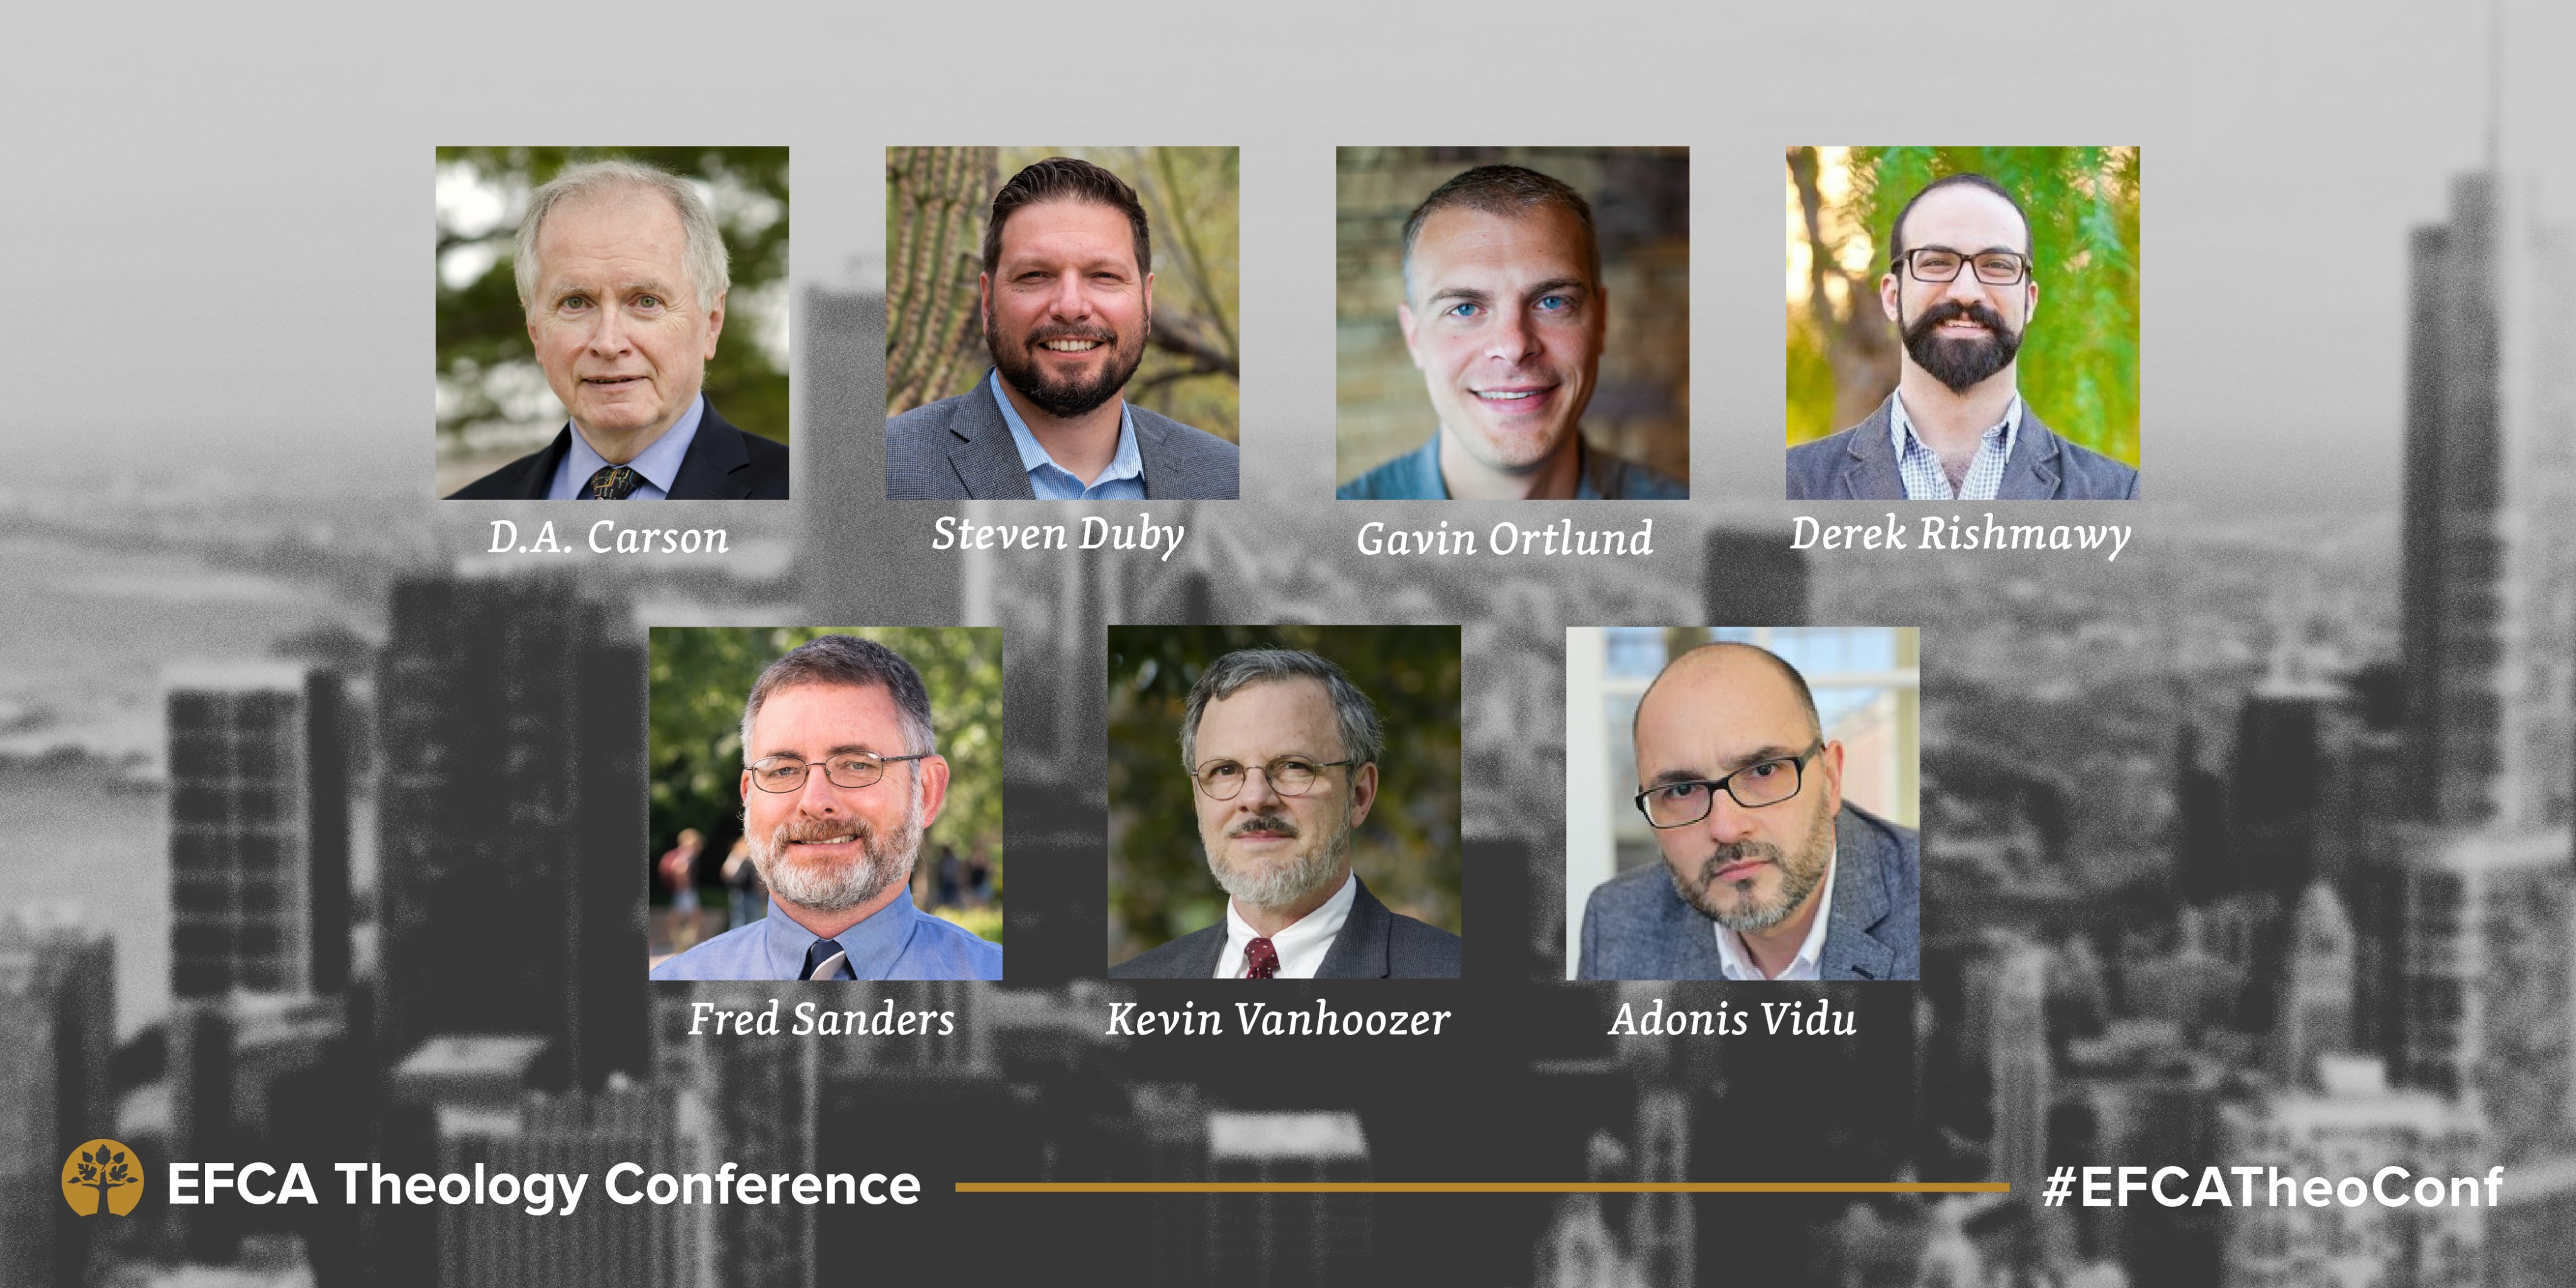 EFCA on Twitter "📣 Announcing the 2023 EFCATheoConf speakers! 📣 We